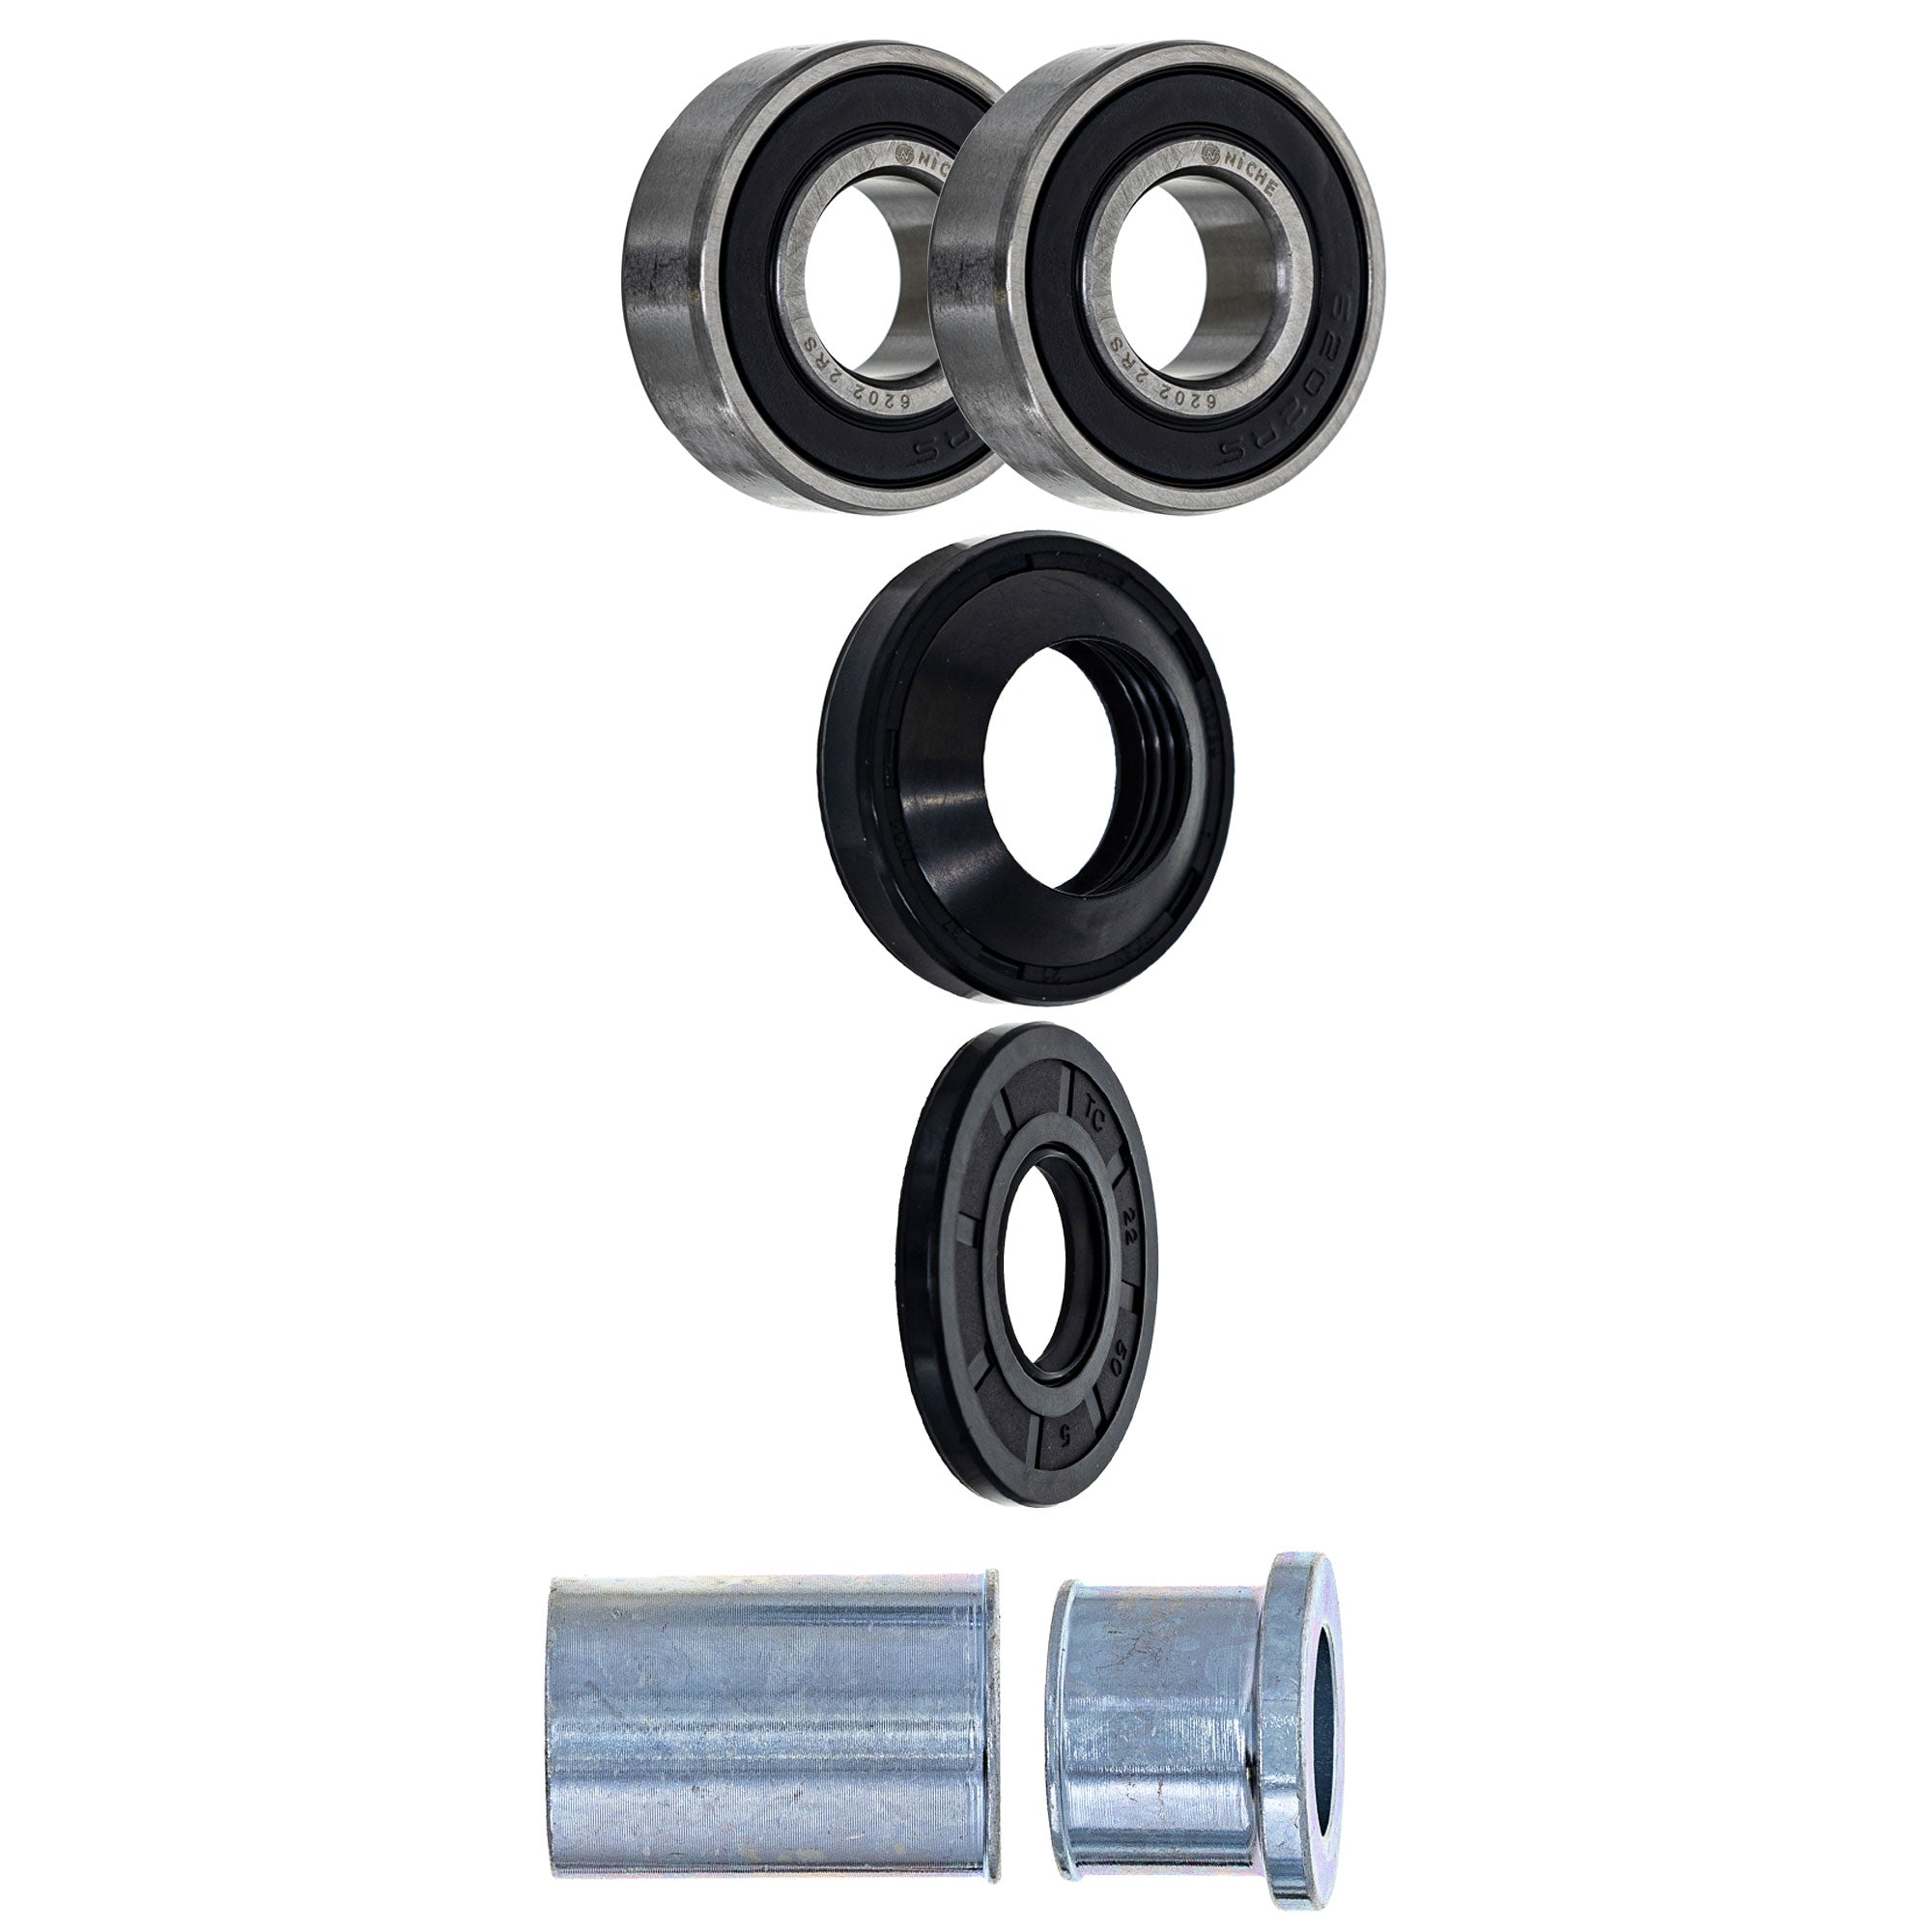 Wheel Bearing Spacer Seal Kit for zOTHER Ref No WR250F CRF230F CRF150F NICHE MK1009230